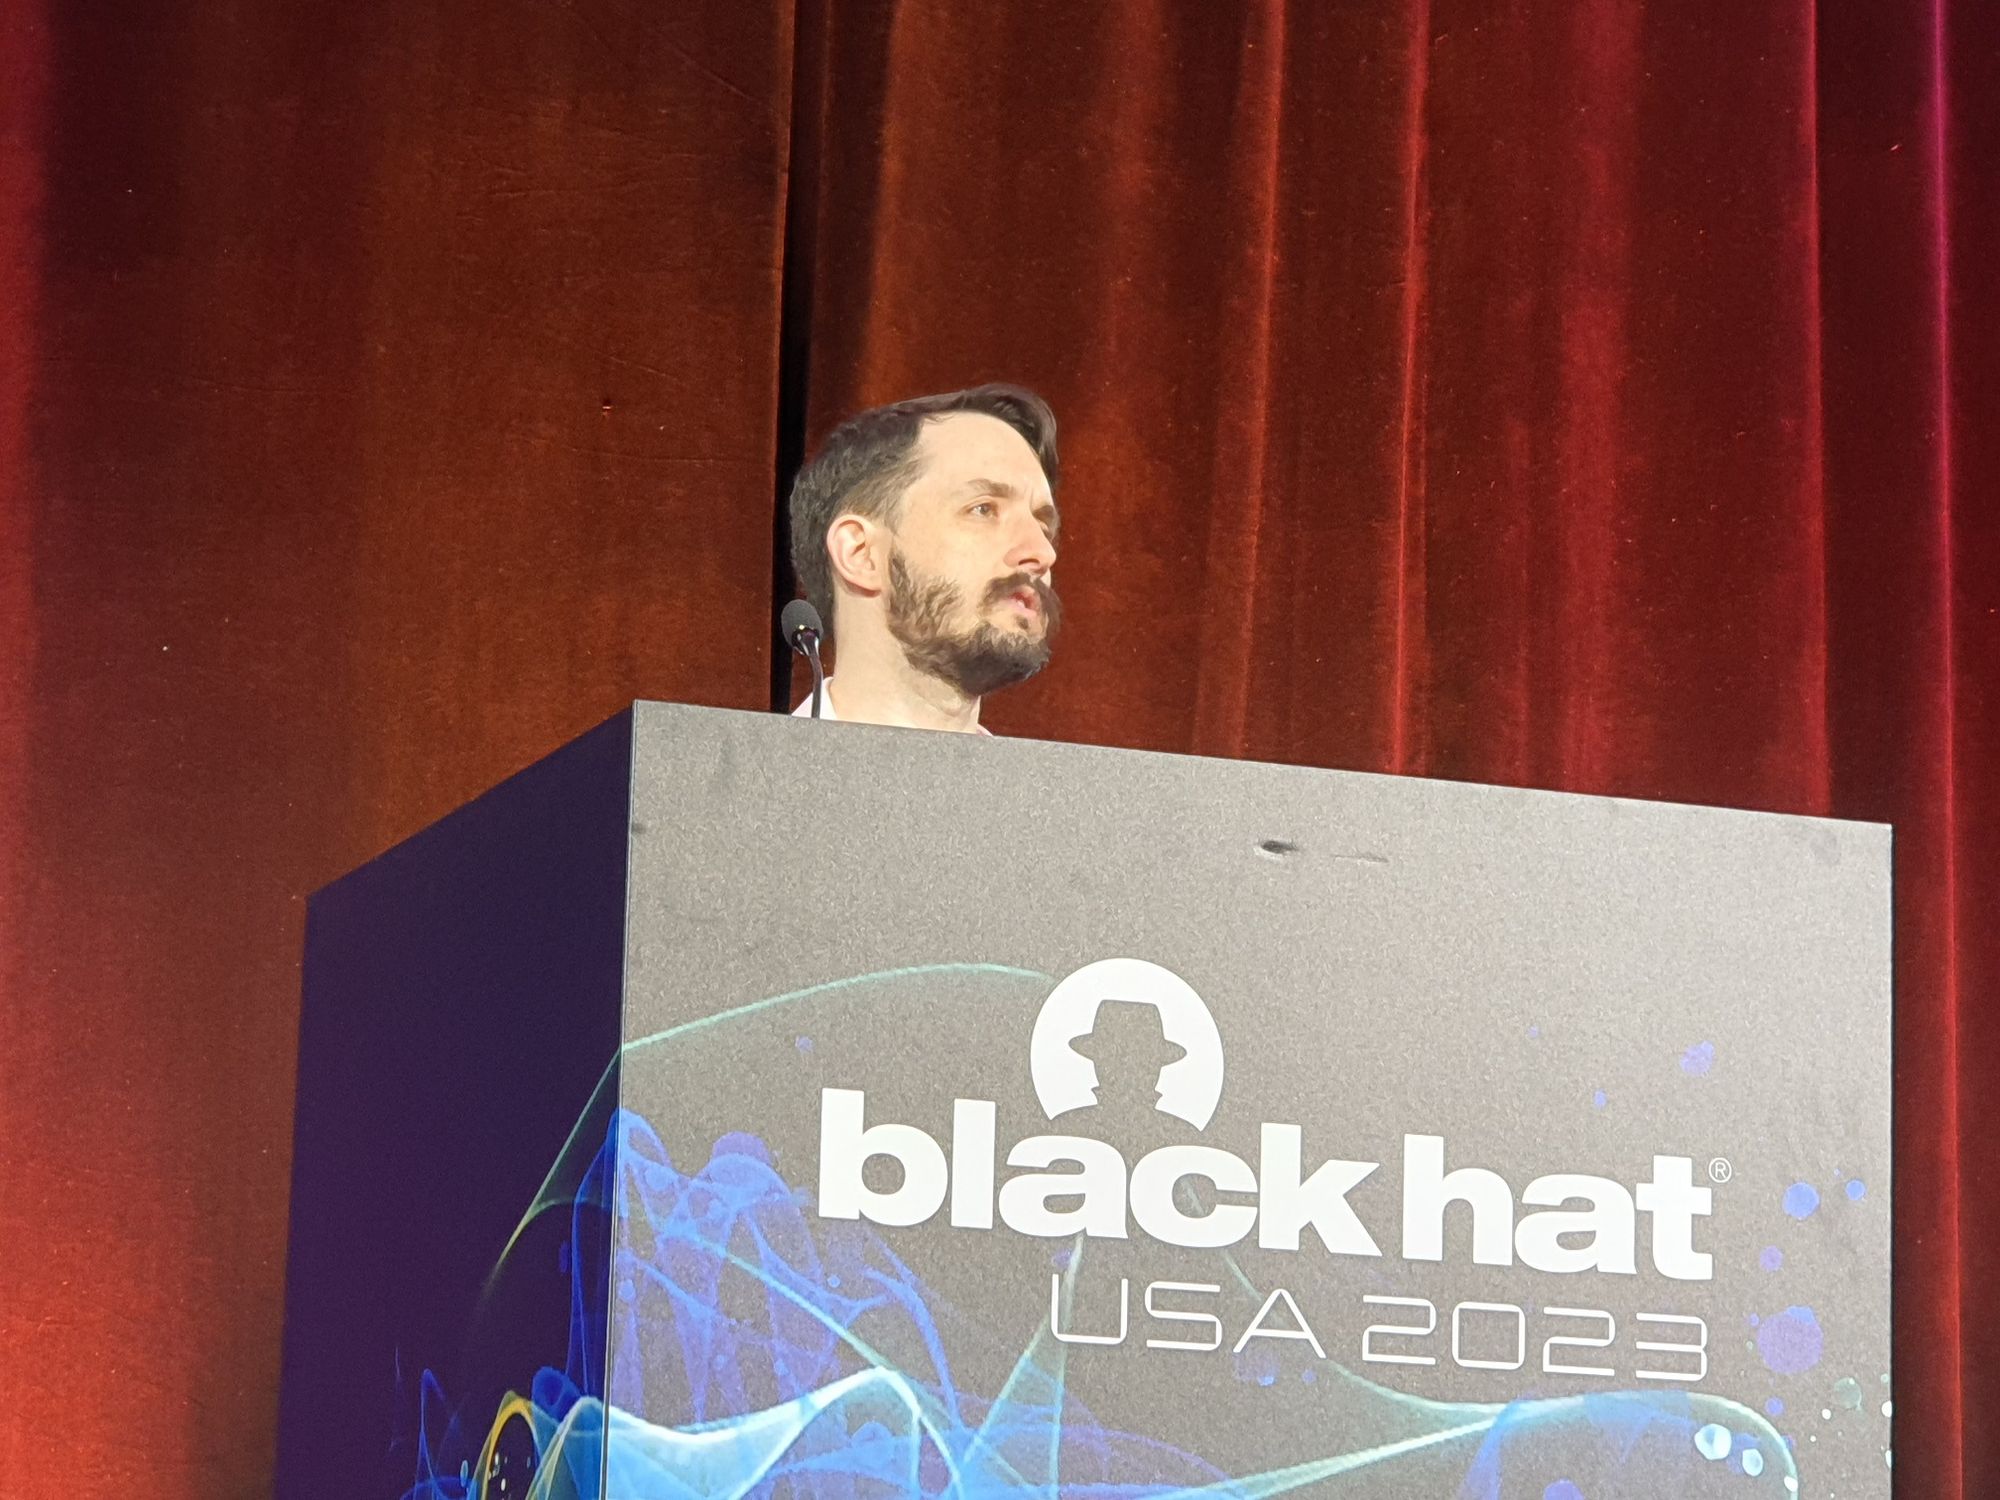 230810 Black Hat GitHub Swanson DO 4 - [Weekend Briefing] Coolest vendors at Black Hat USA 2023